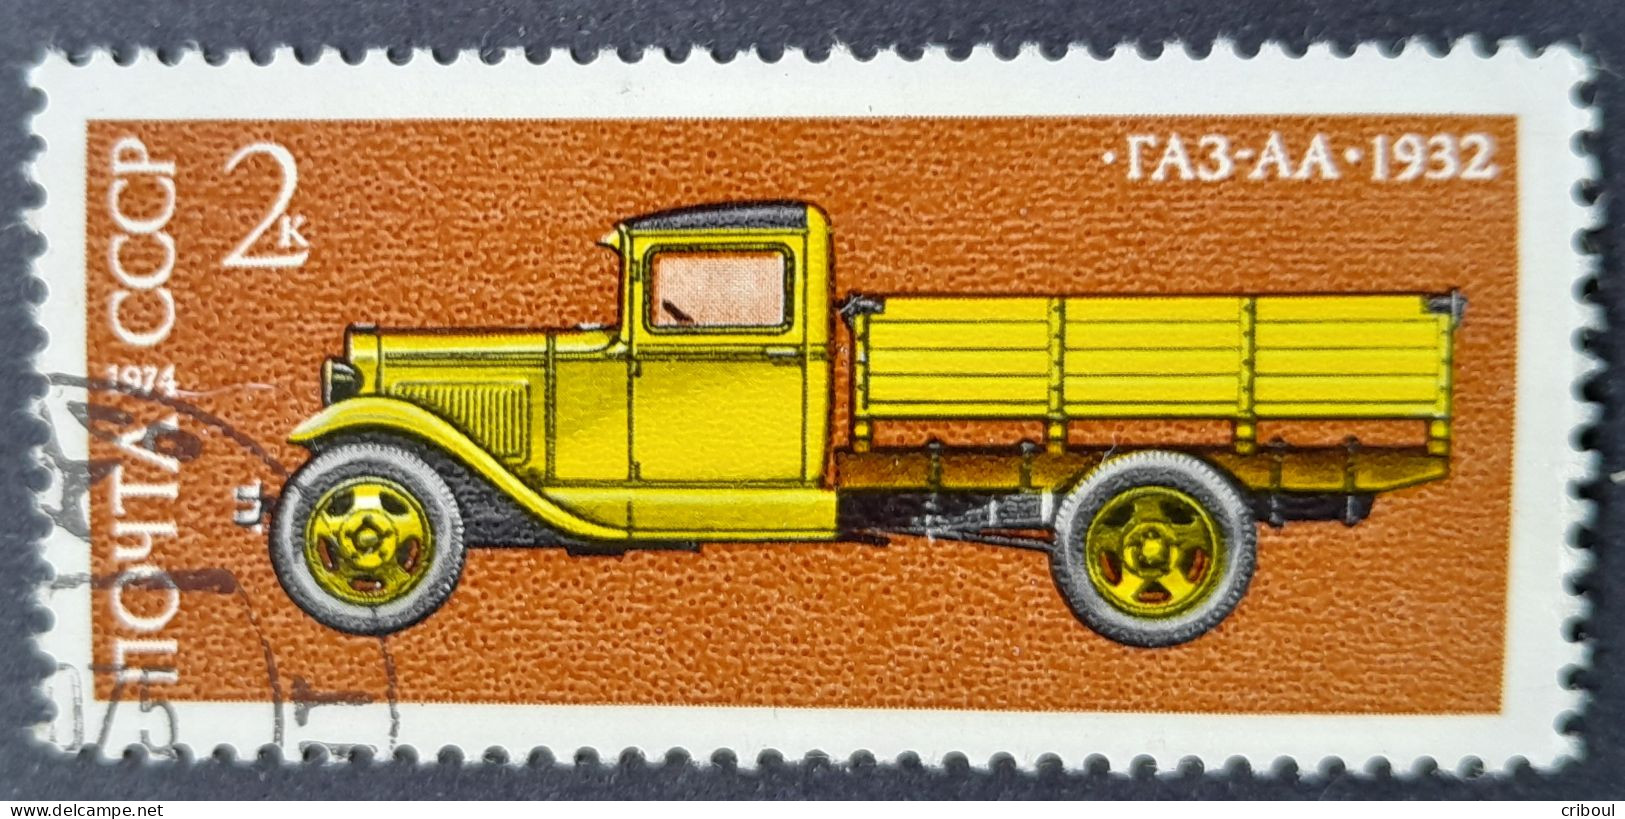 Russie Russia URSS USSR 1974 Camion Truck Yvert 4048 O Used - LKW